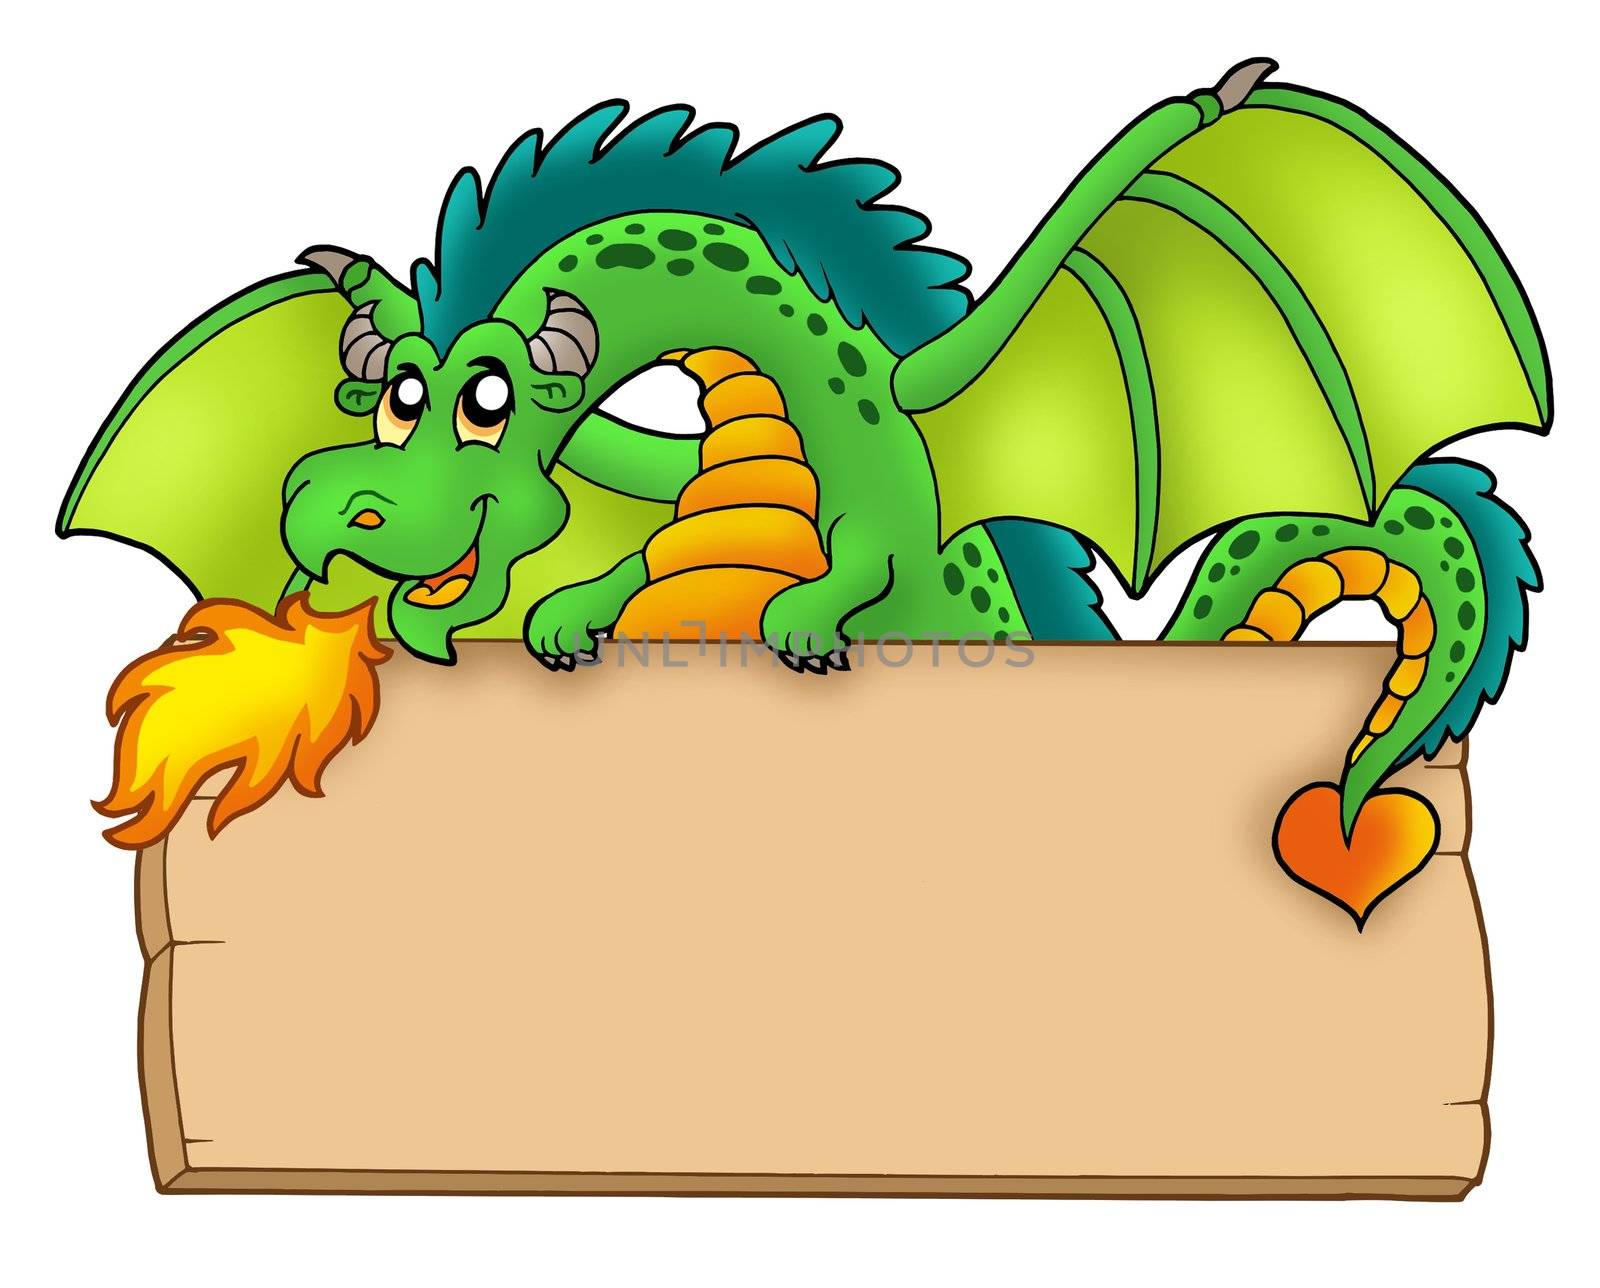 Giant green dragon holding board by clairev